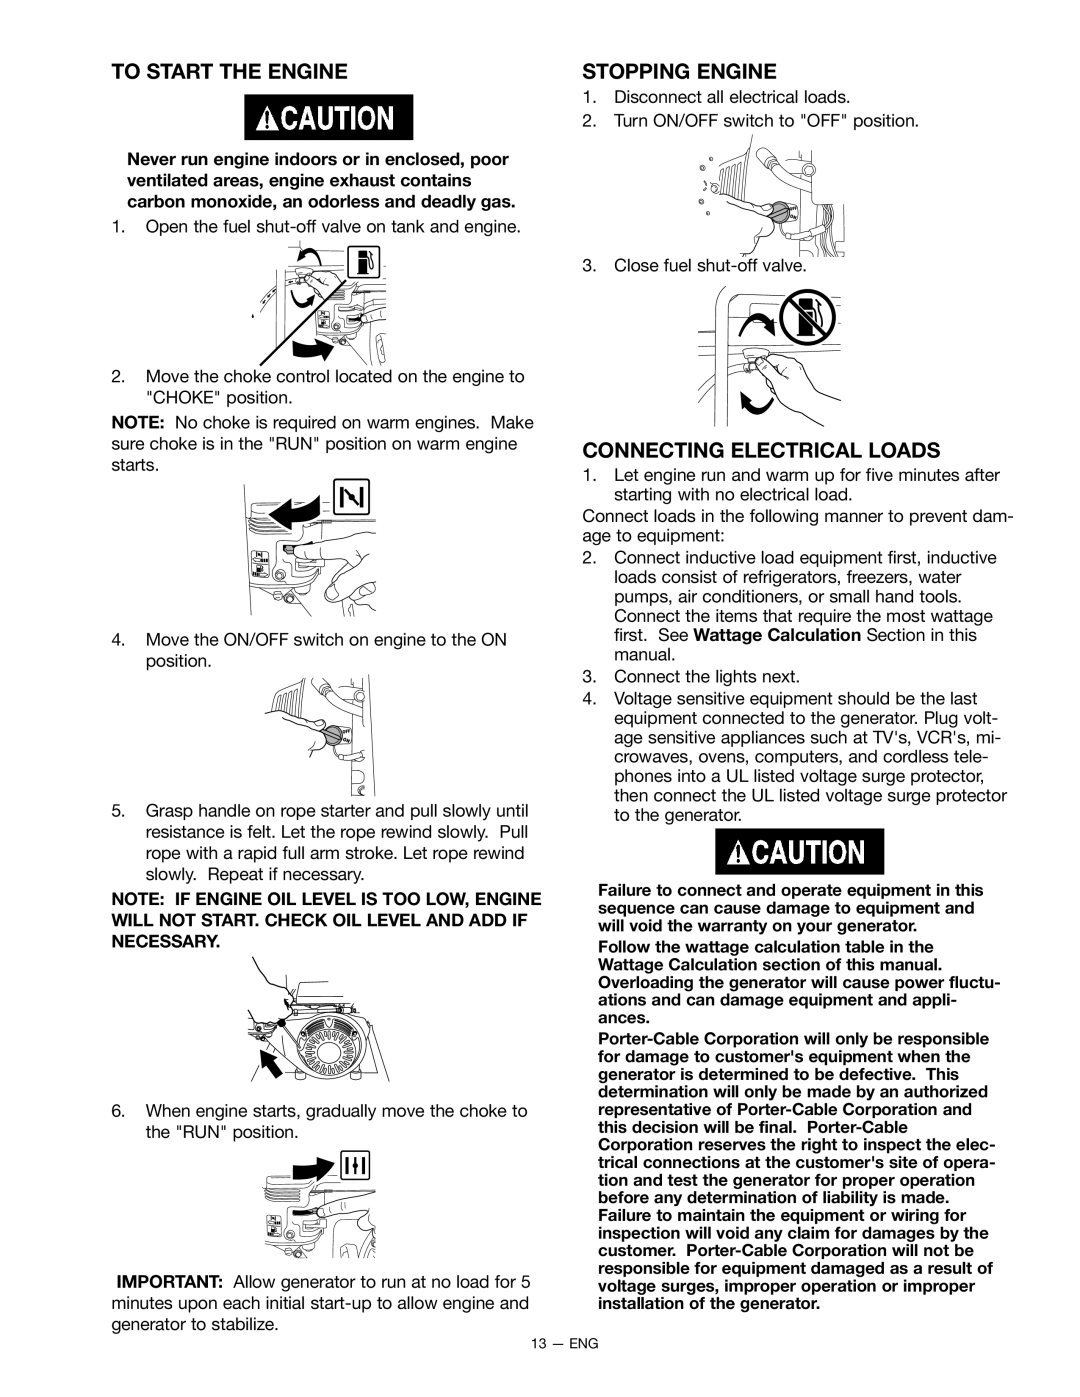 Porter-Cable H451CS instruction manual To Start The Engine, Stopping Engine, Connecting Electrical Loads 